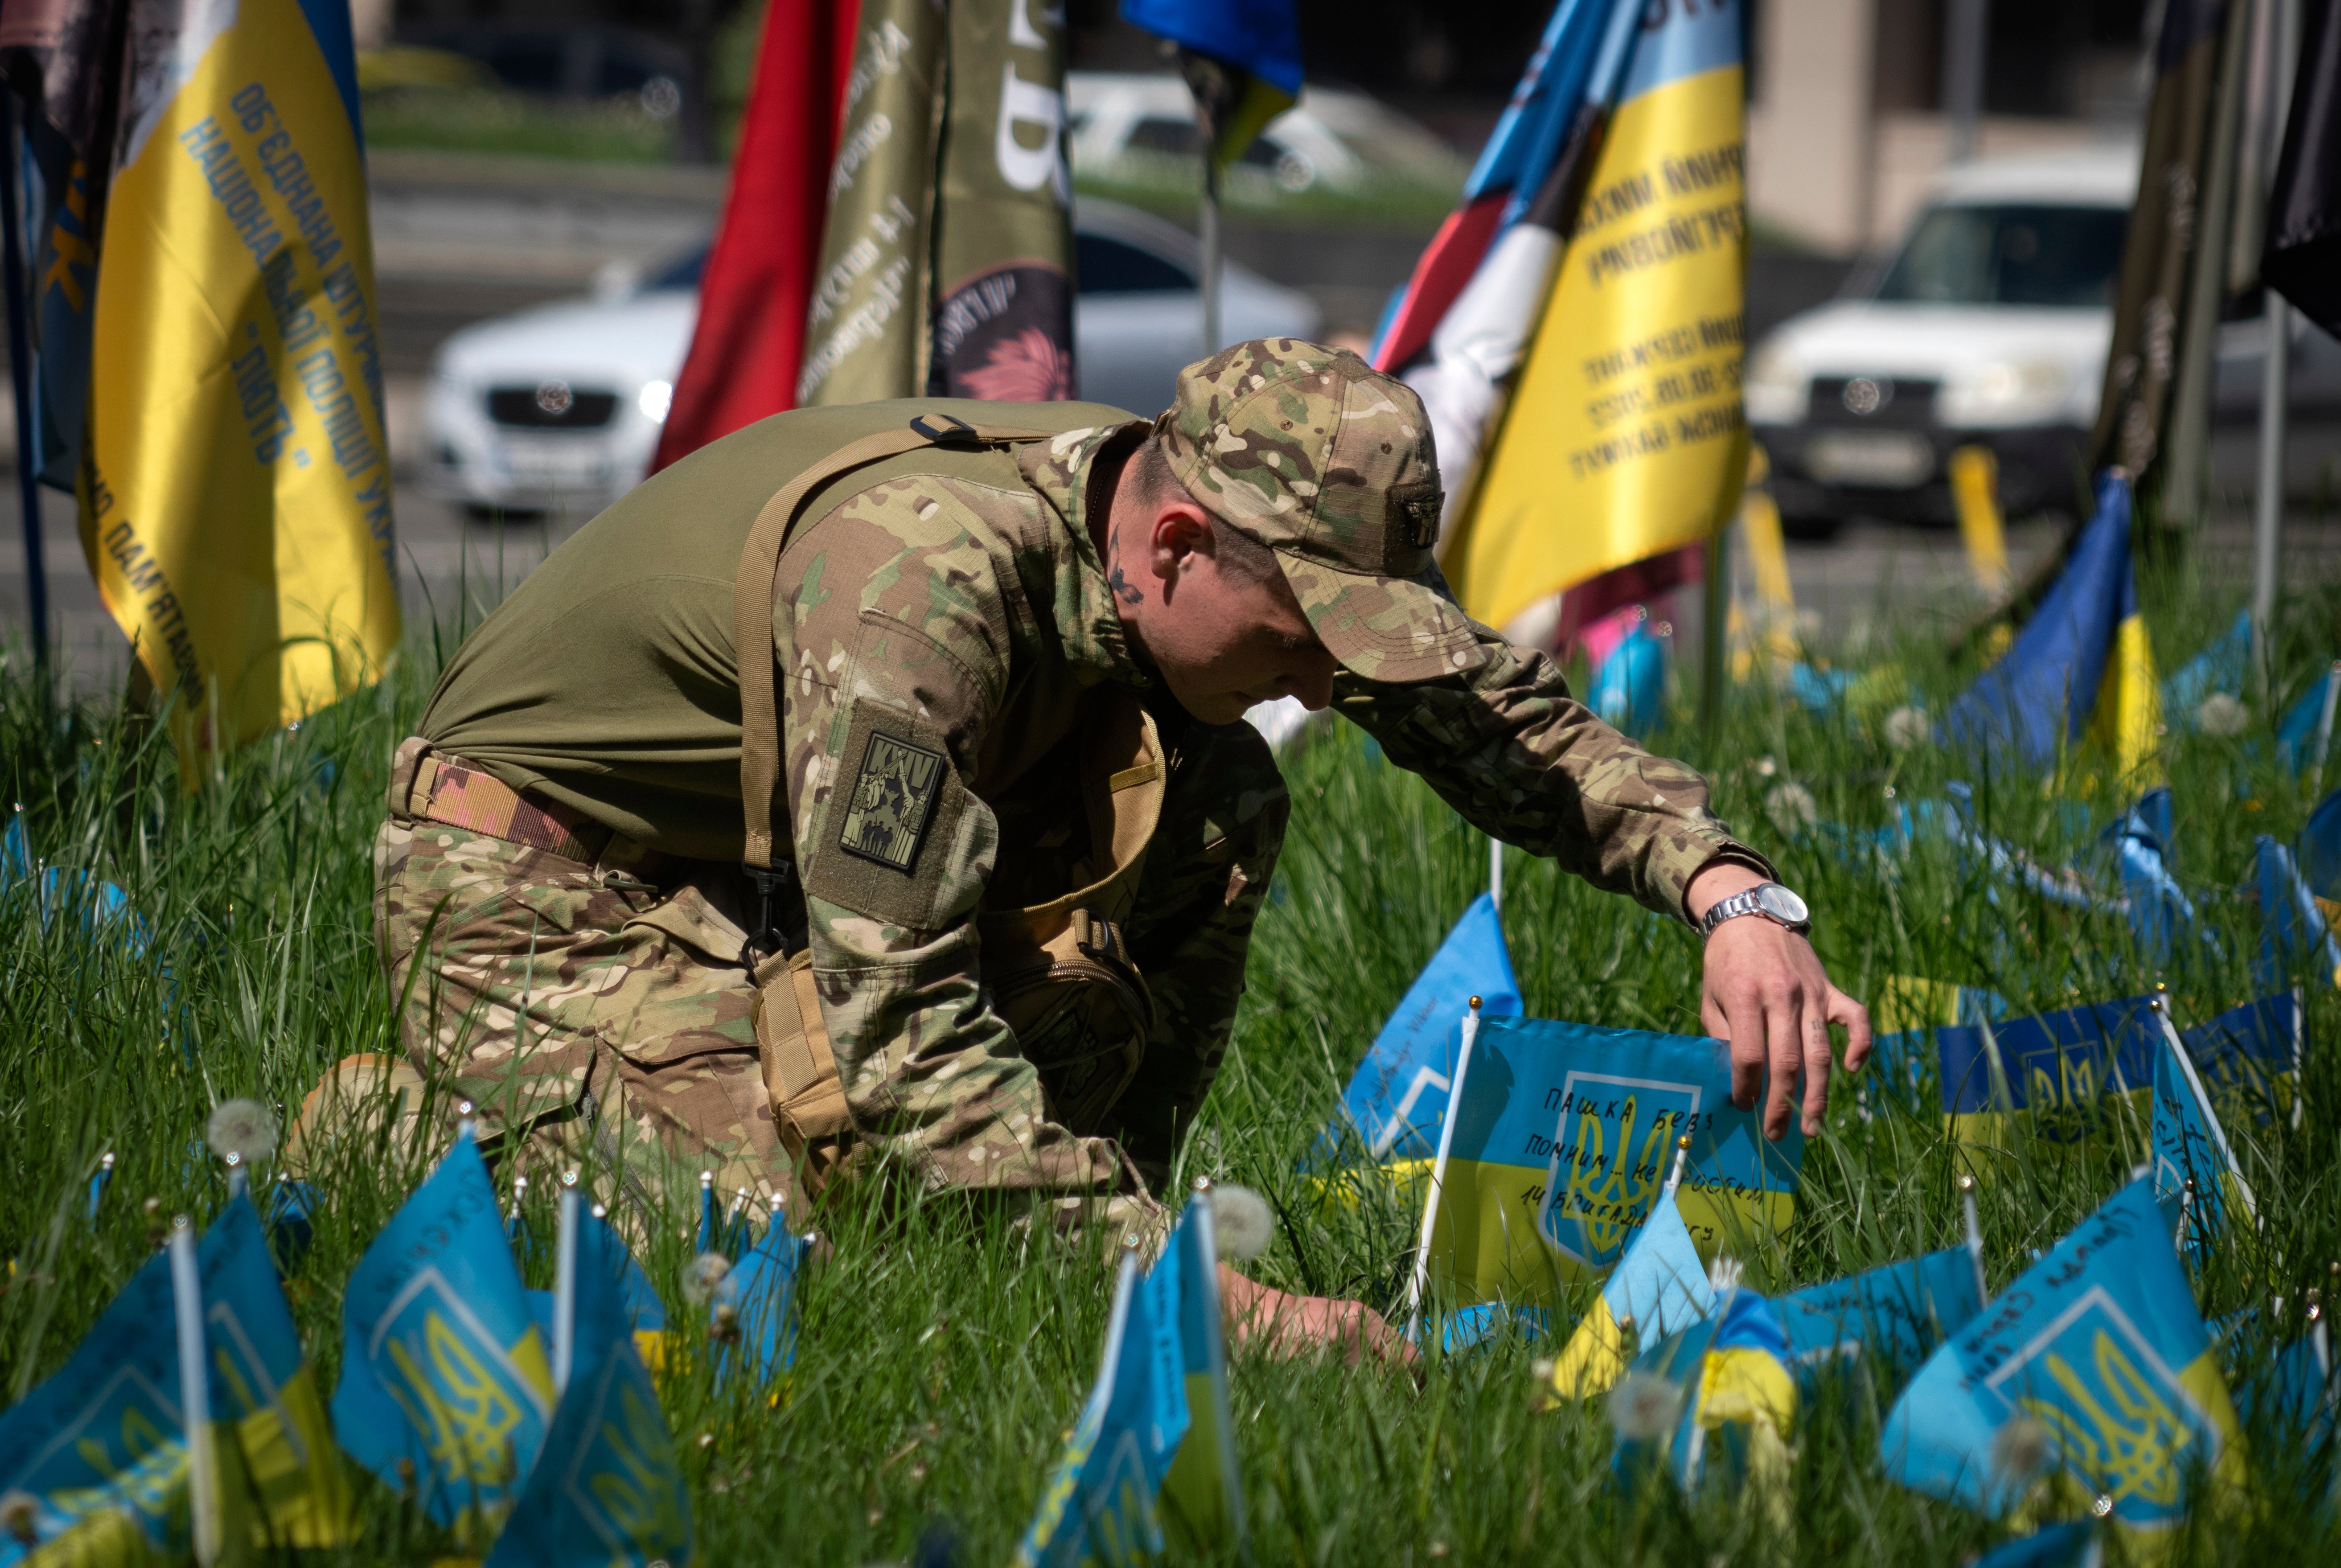 A Ukrainian soldier instals a national flag on a grassed area at the Independence square in Kyiv